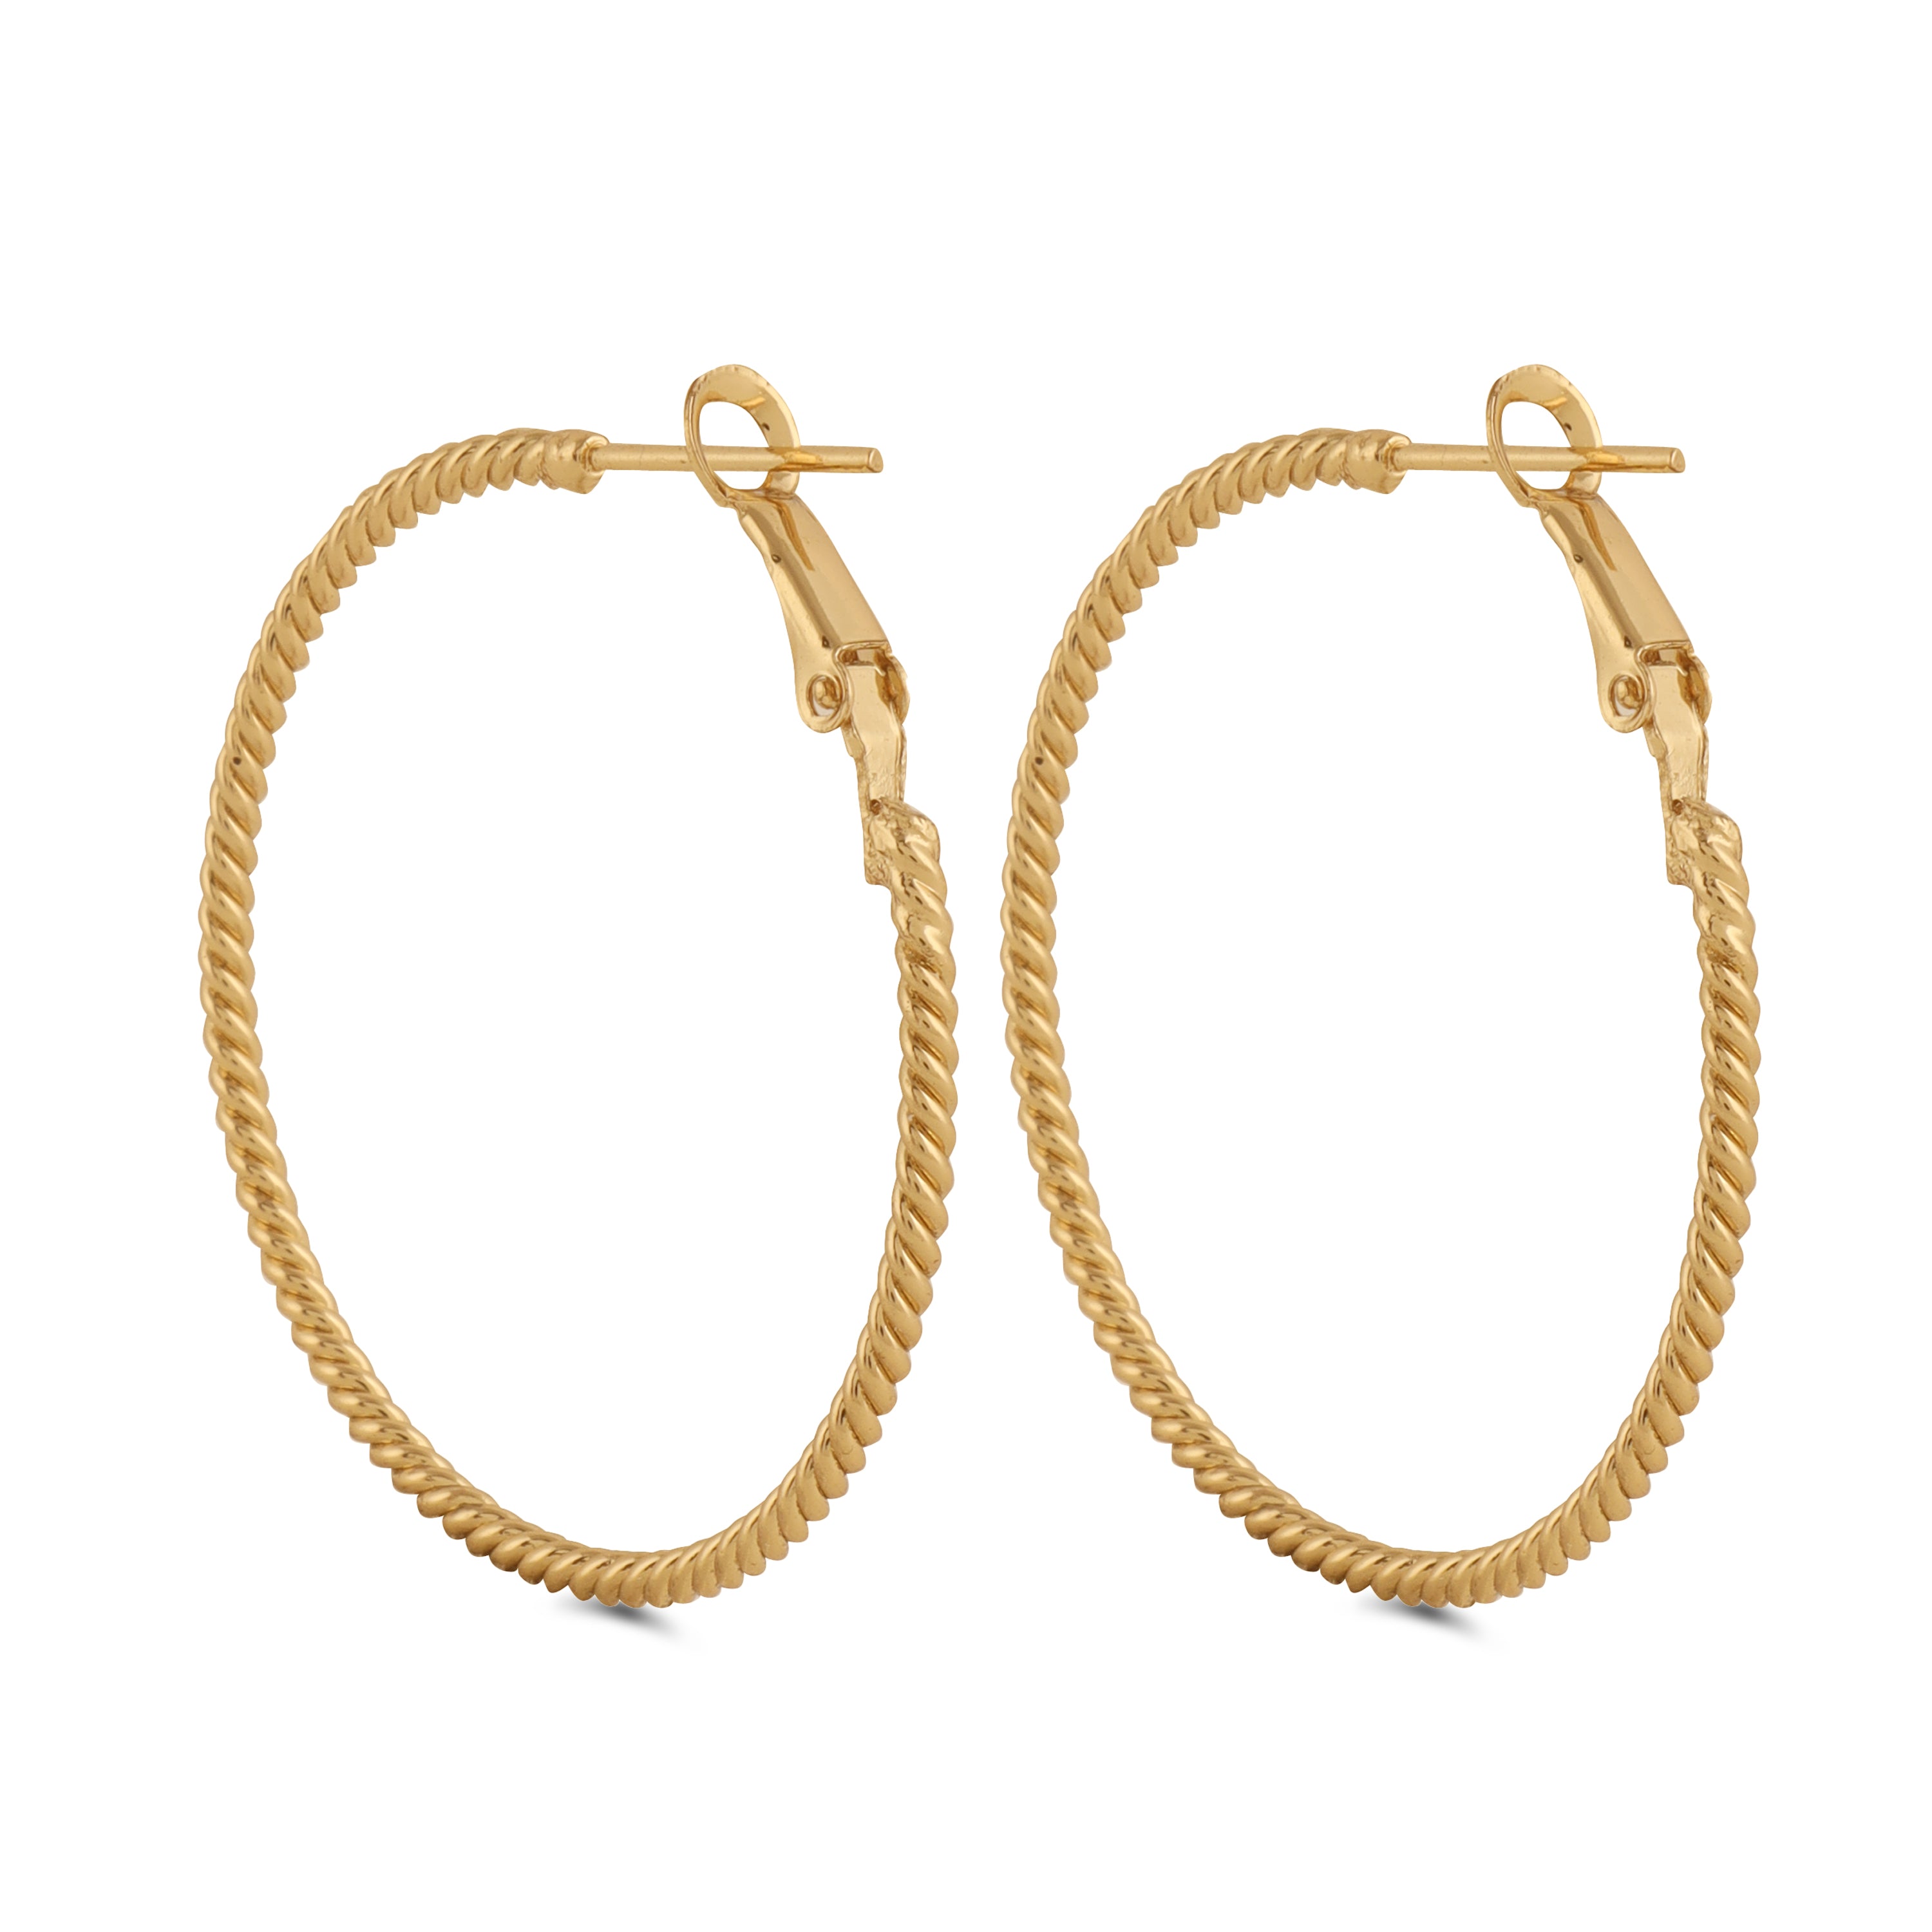 TFC Classic Gold Plated Hoop Earrings- Discover daily wear gold earrings including stud earrings, hoop earrings, and pearl earrings, perfect as earrings for women and earrings for girls.Find the cheapest fashion jewellery which is anti-tarnis​h only at The Fun company.